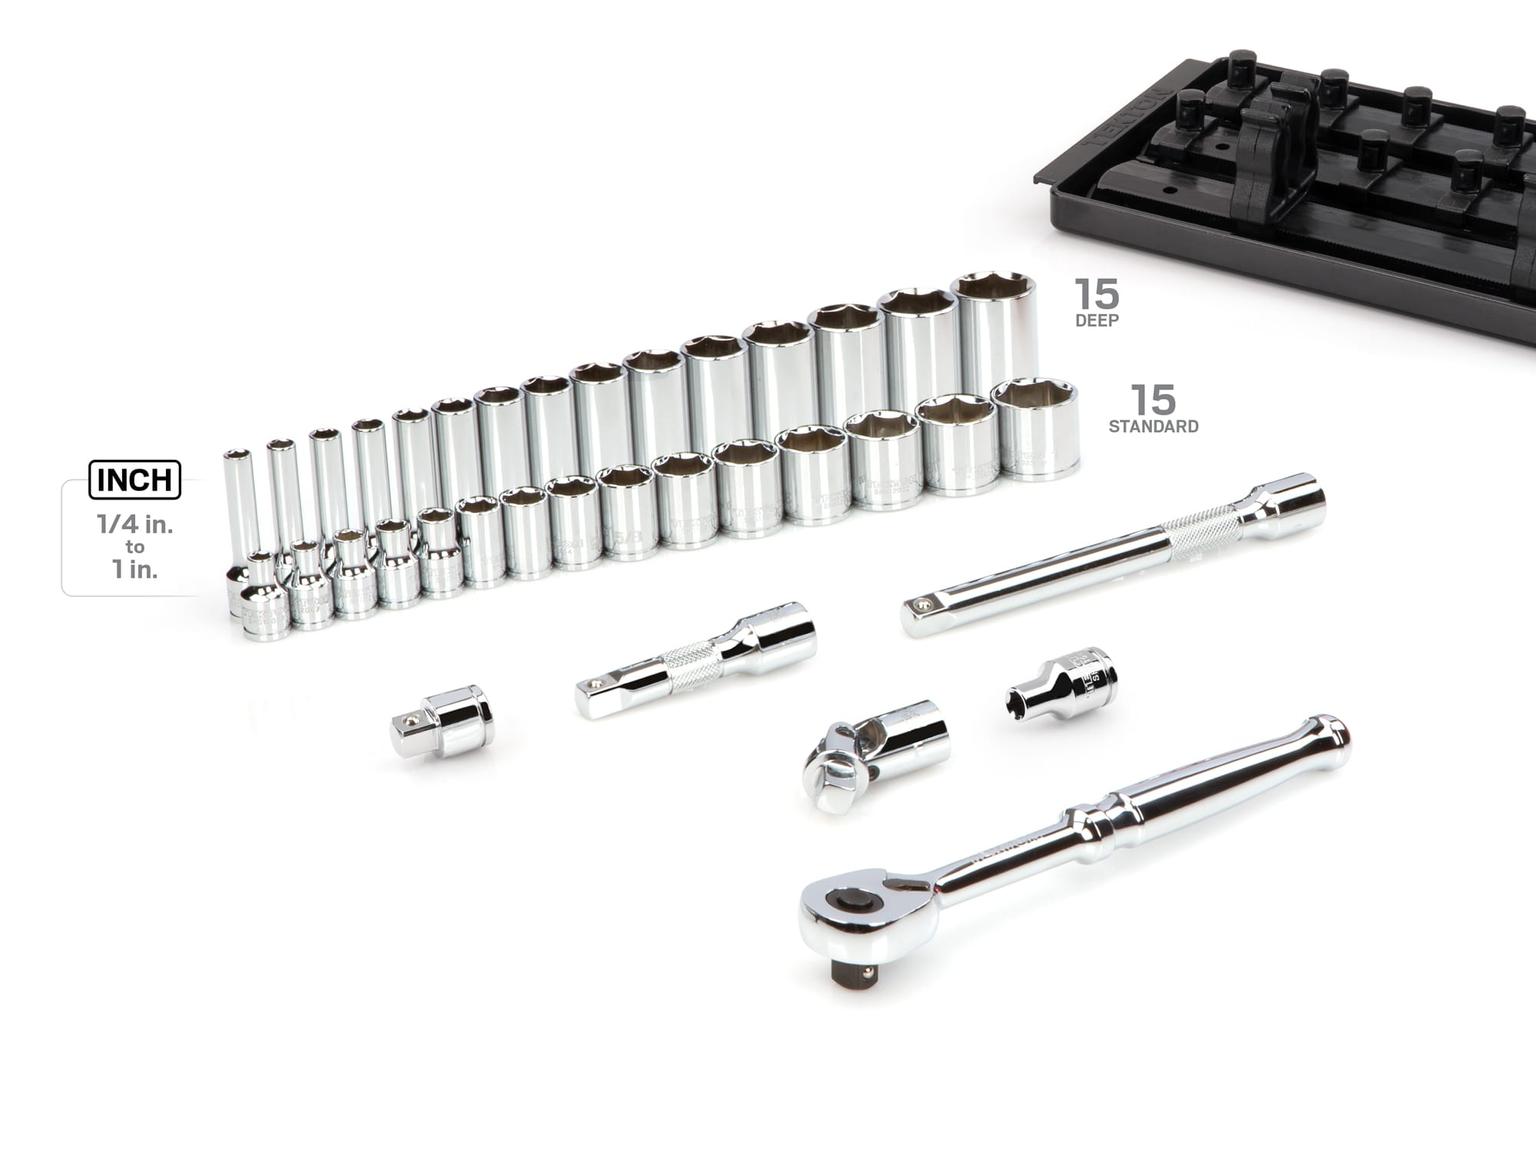 TEKTON SKT13101-T 3/8 Inch Drive 6-Point Socket and Ratchet Set with Rails, 36-Piece (1/4-1 in.)